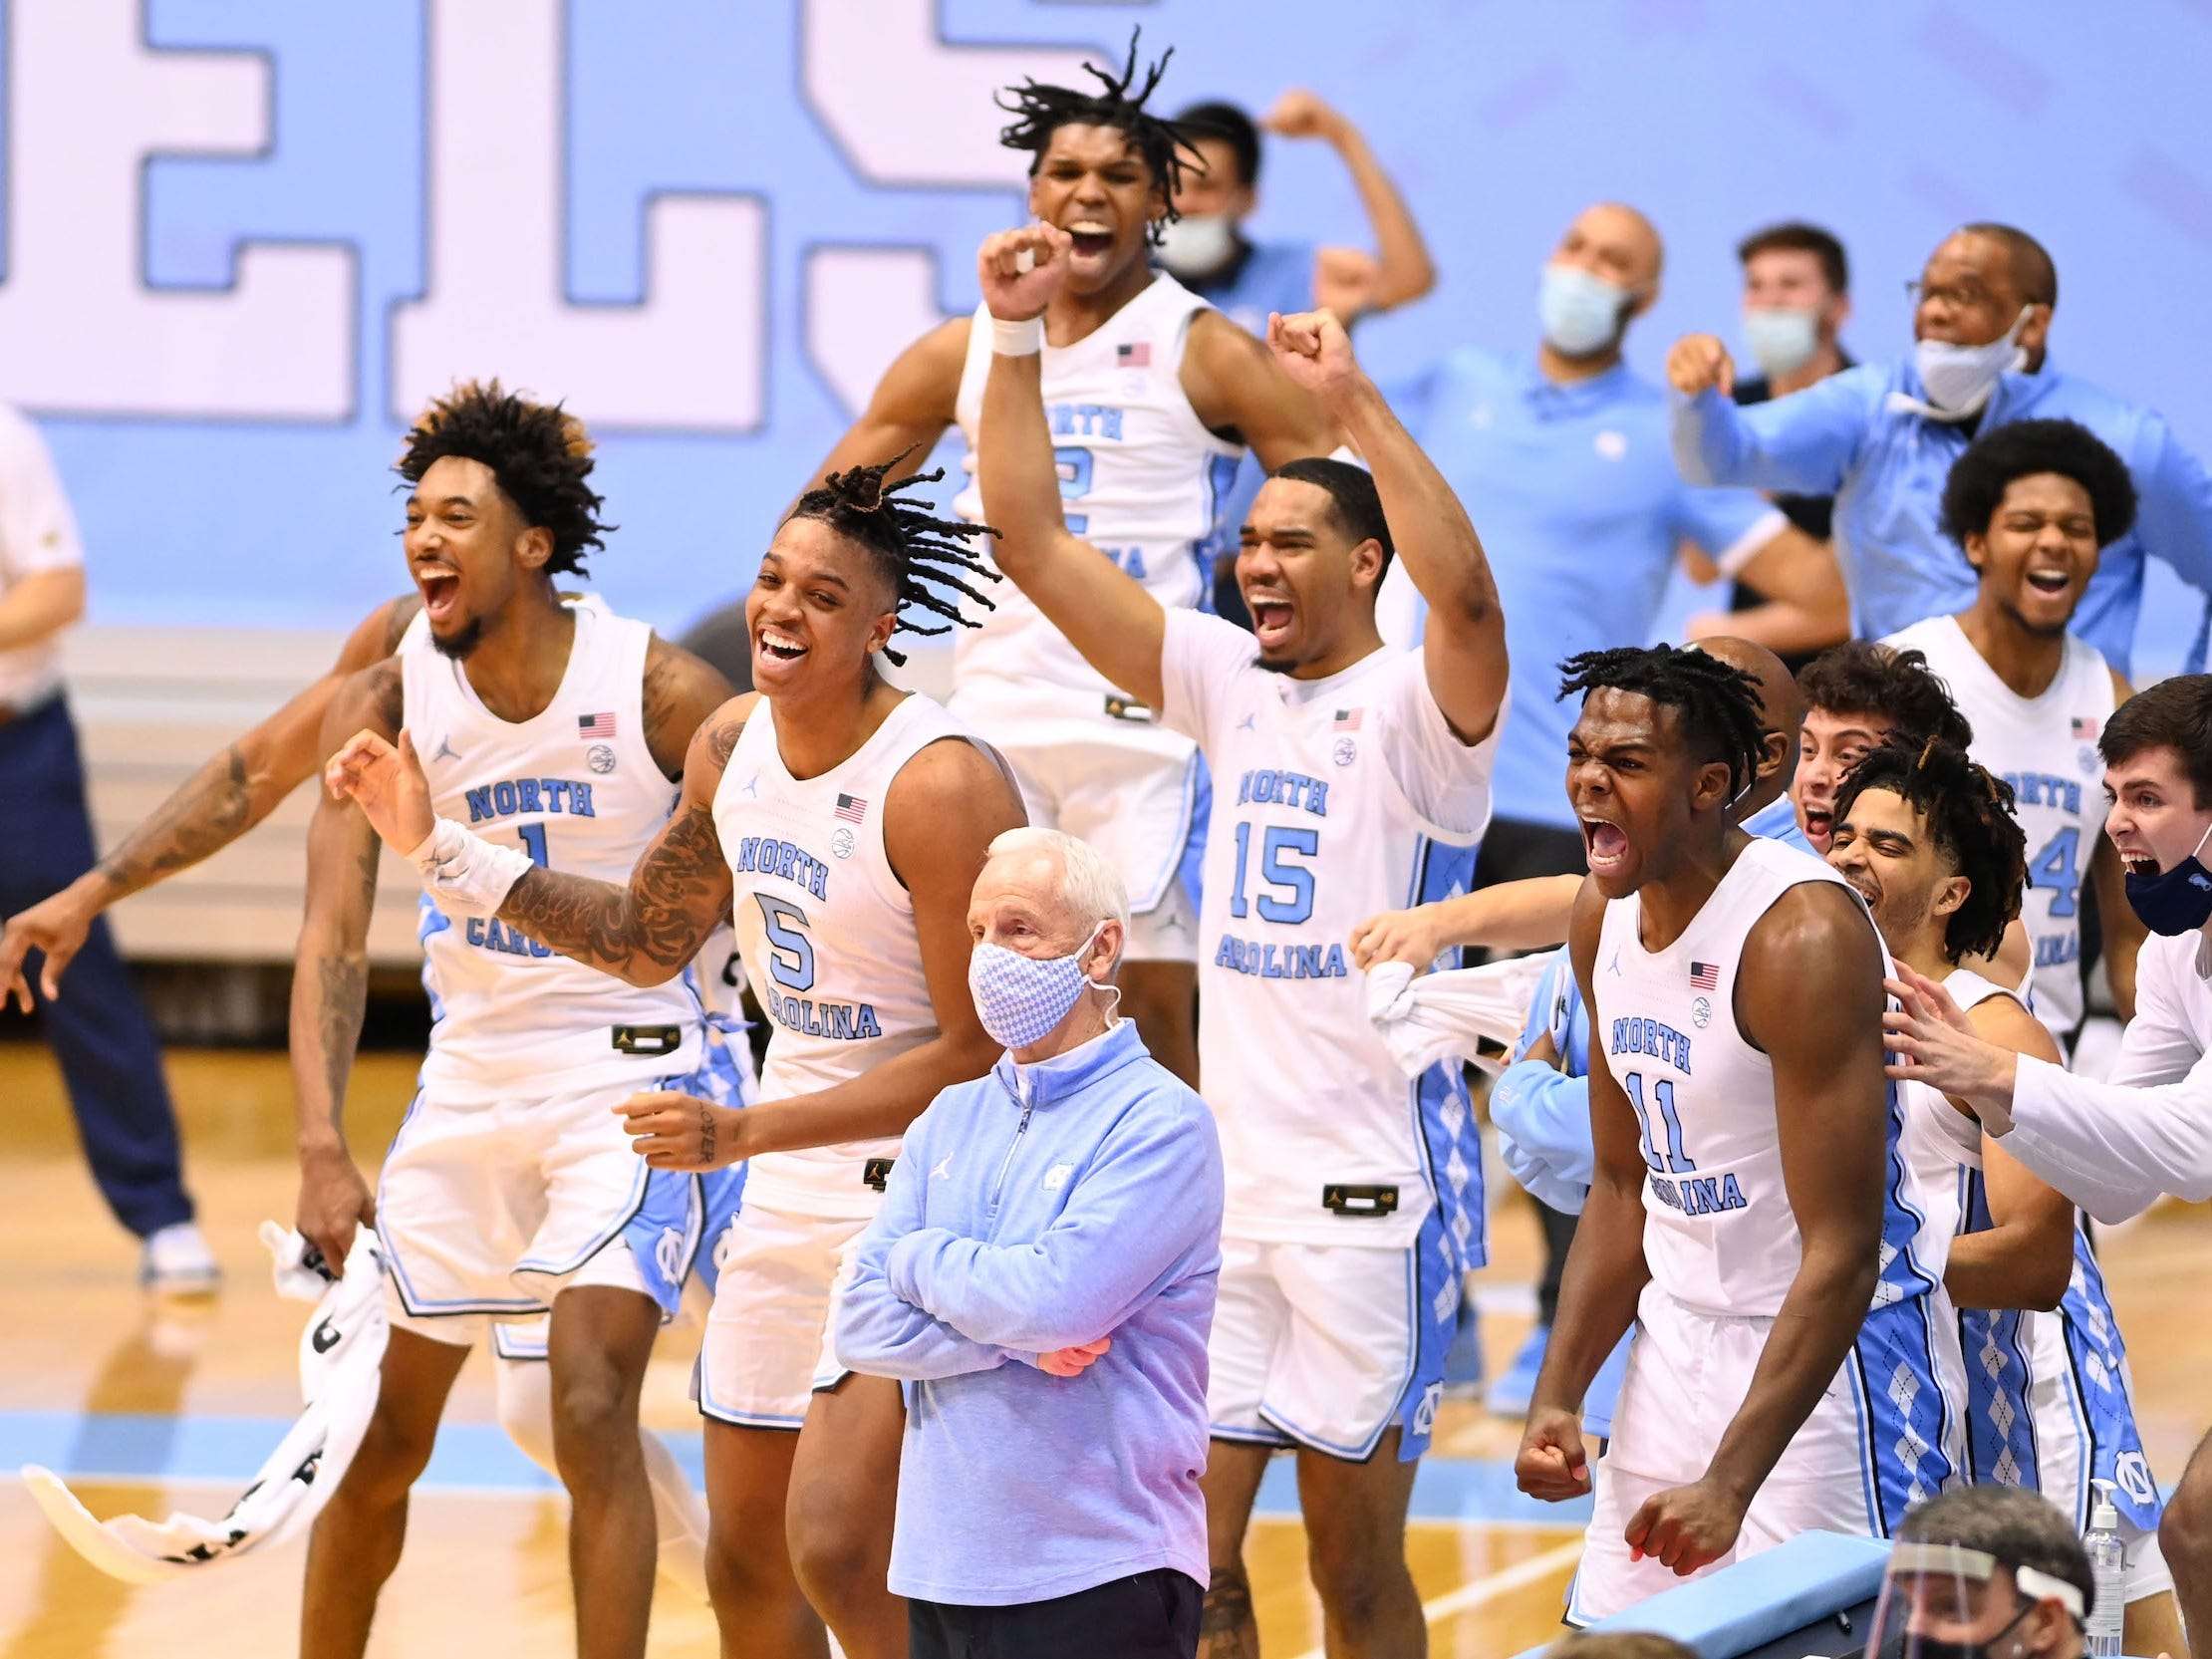 UNC fans chant 'NIT' at Duke players during blowout win that likely